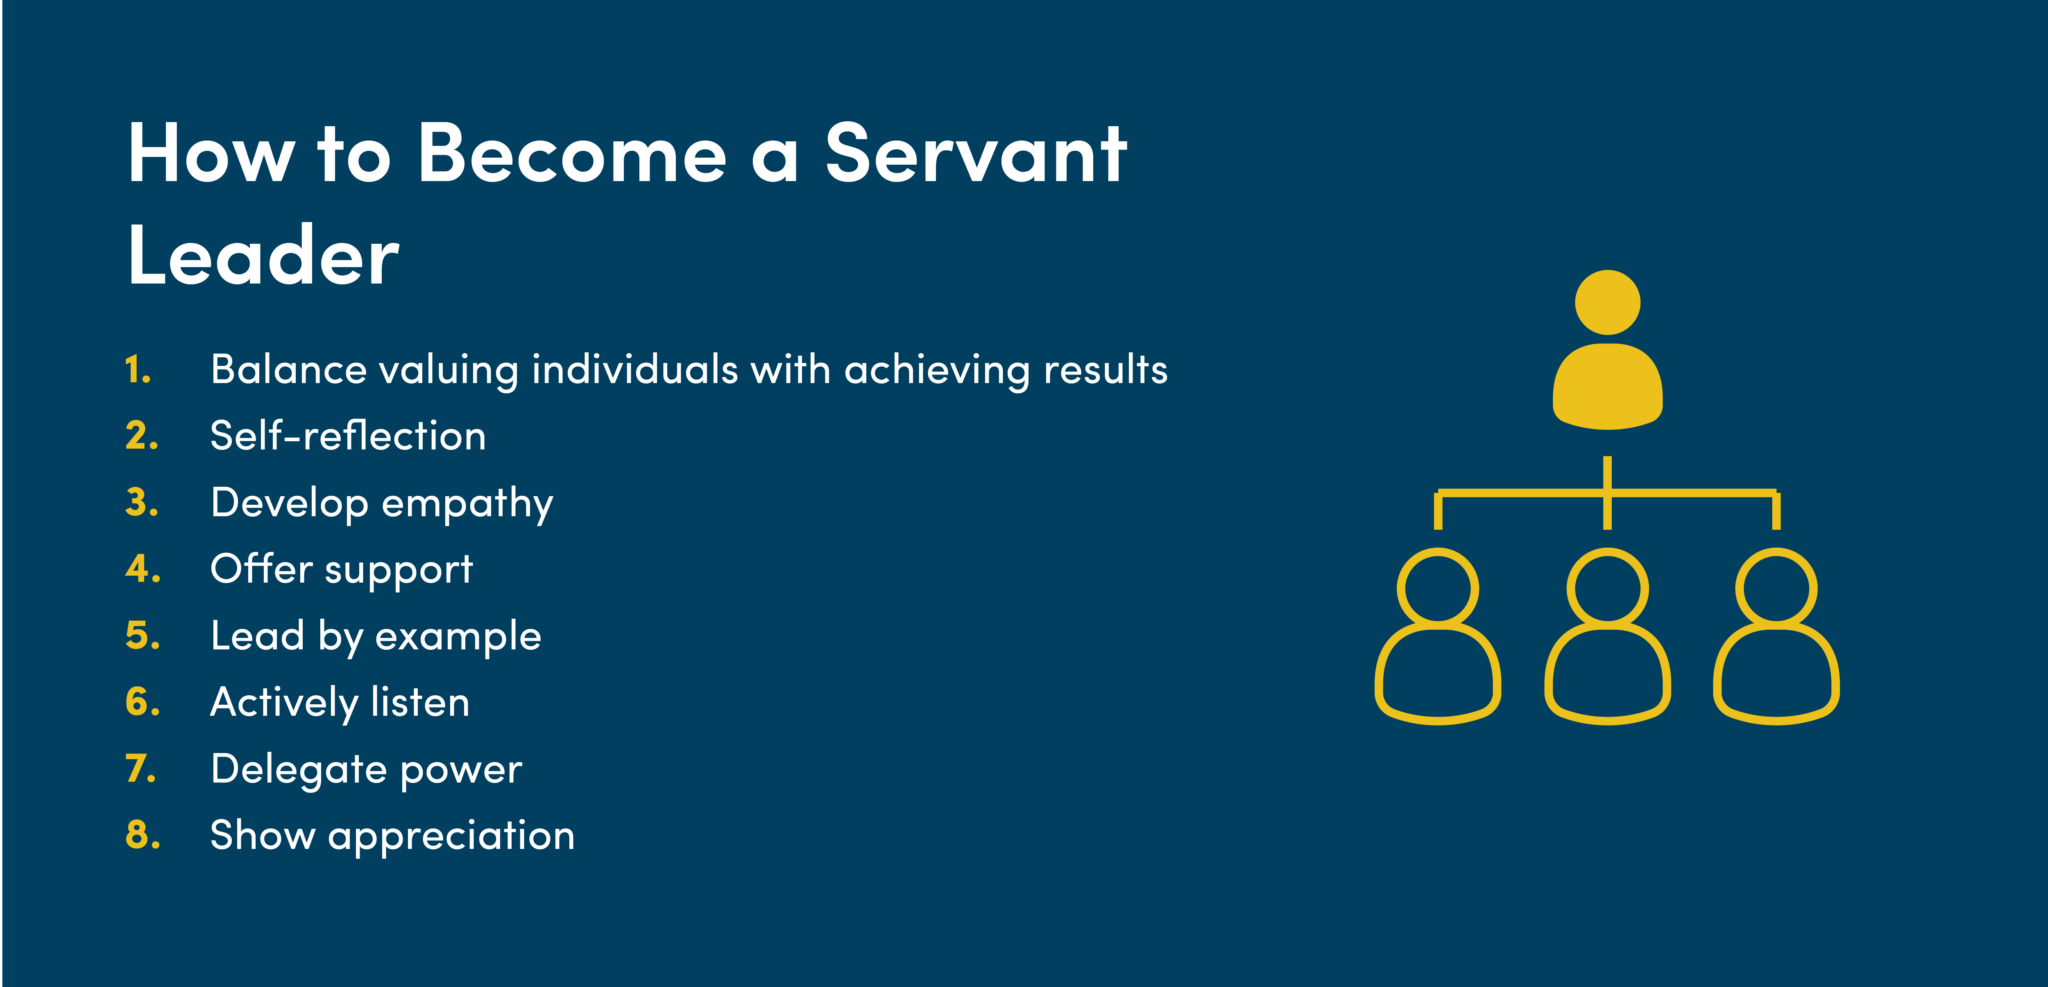 How to become a servant leader